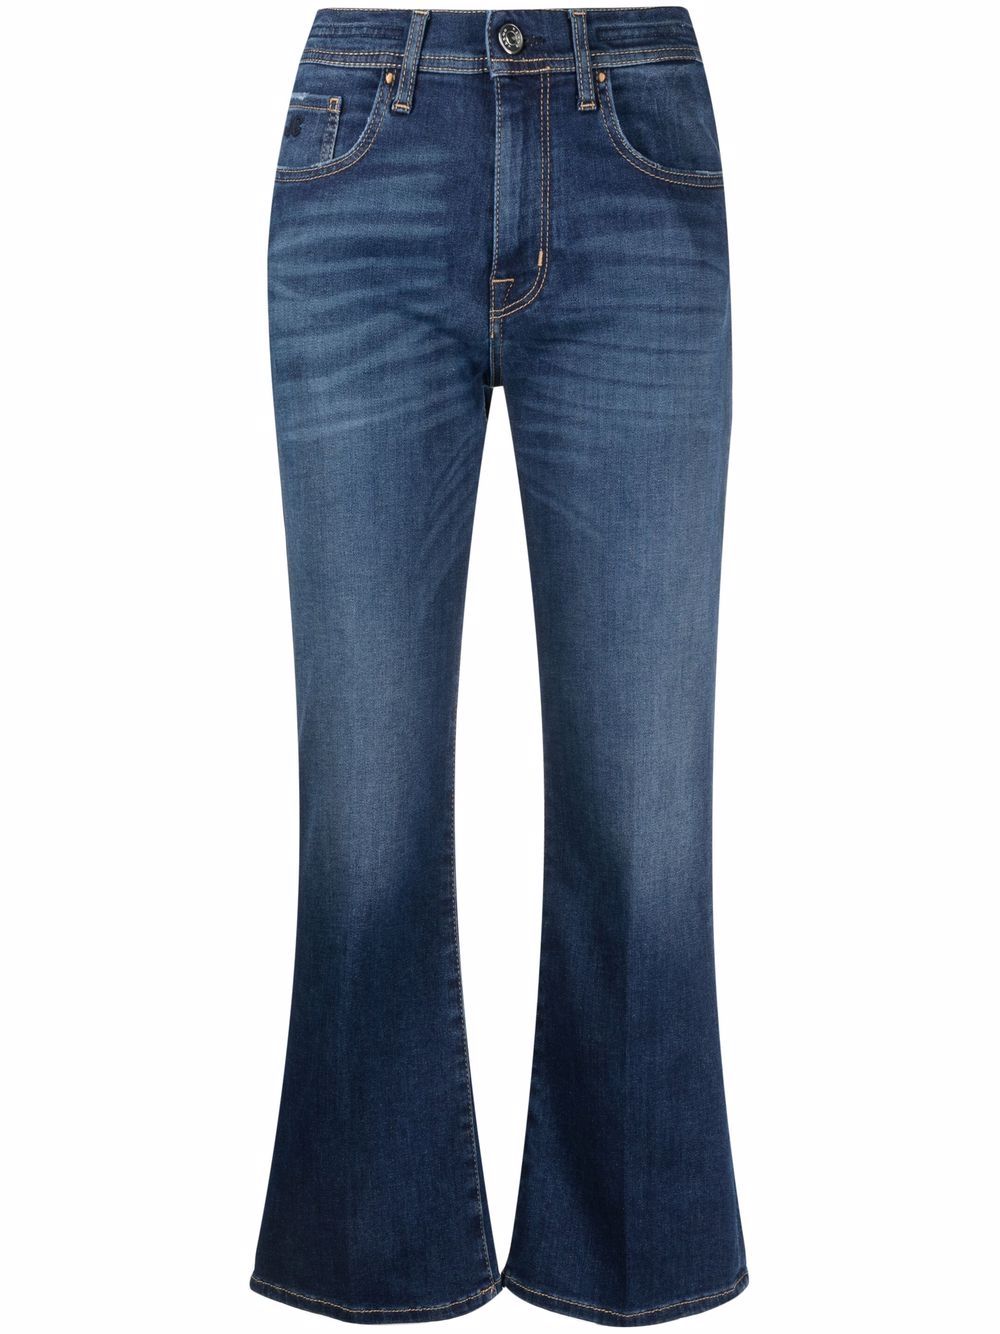 Jacob Cohën Faded Wash Cropped Jeans - Farfetch